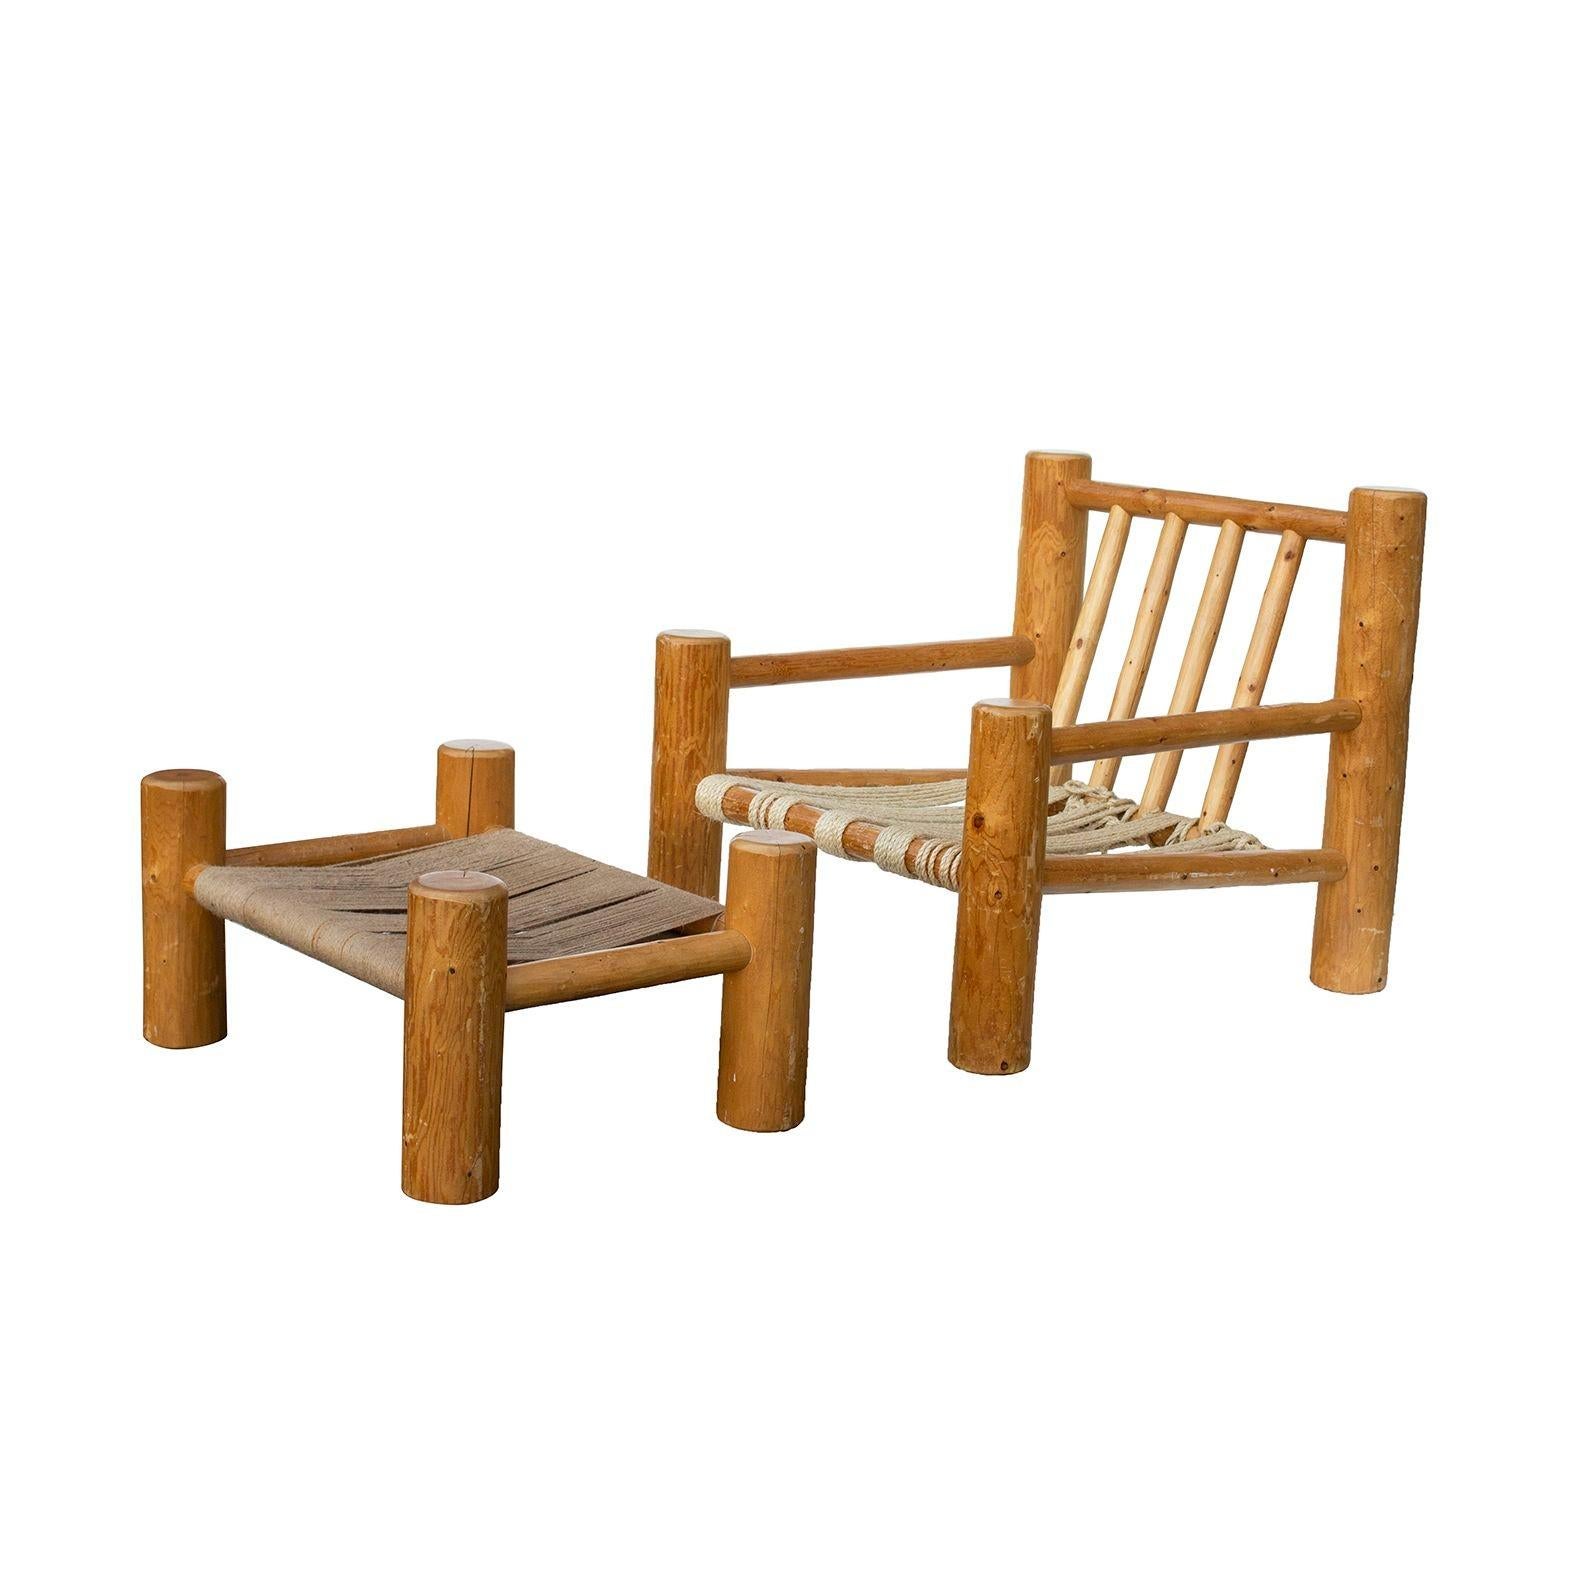 USA, 1980s
Hand hewn solid pine log armchair and matching ottoman. Incredible piece for your modern cabin, lodge, or organic modern, minimalist interior. Natural materials and hand-hewn solid wood frame brings to mind cabin and lodge life-